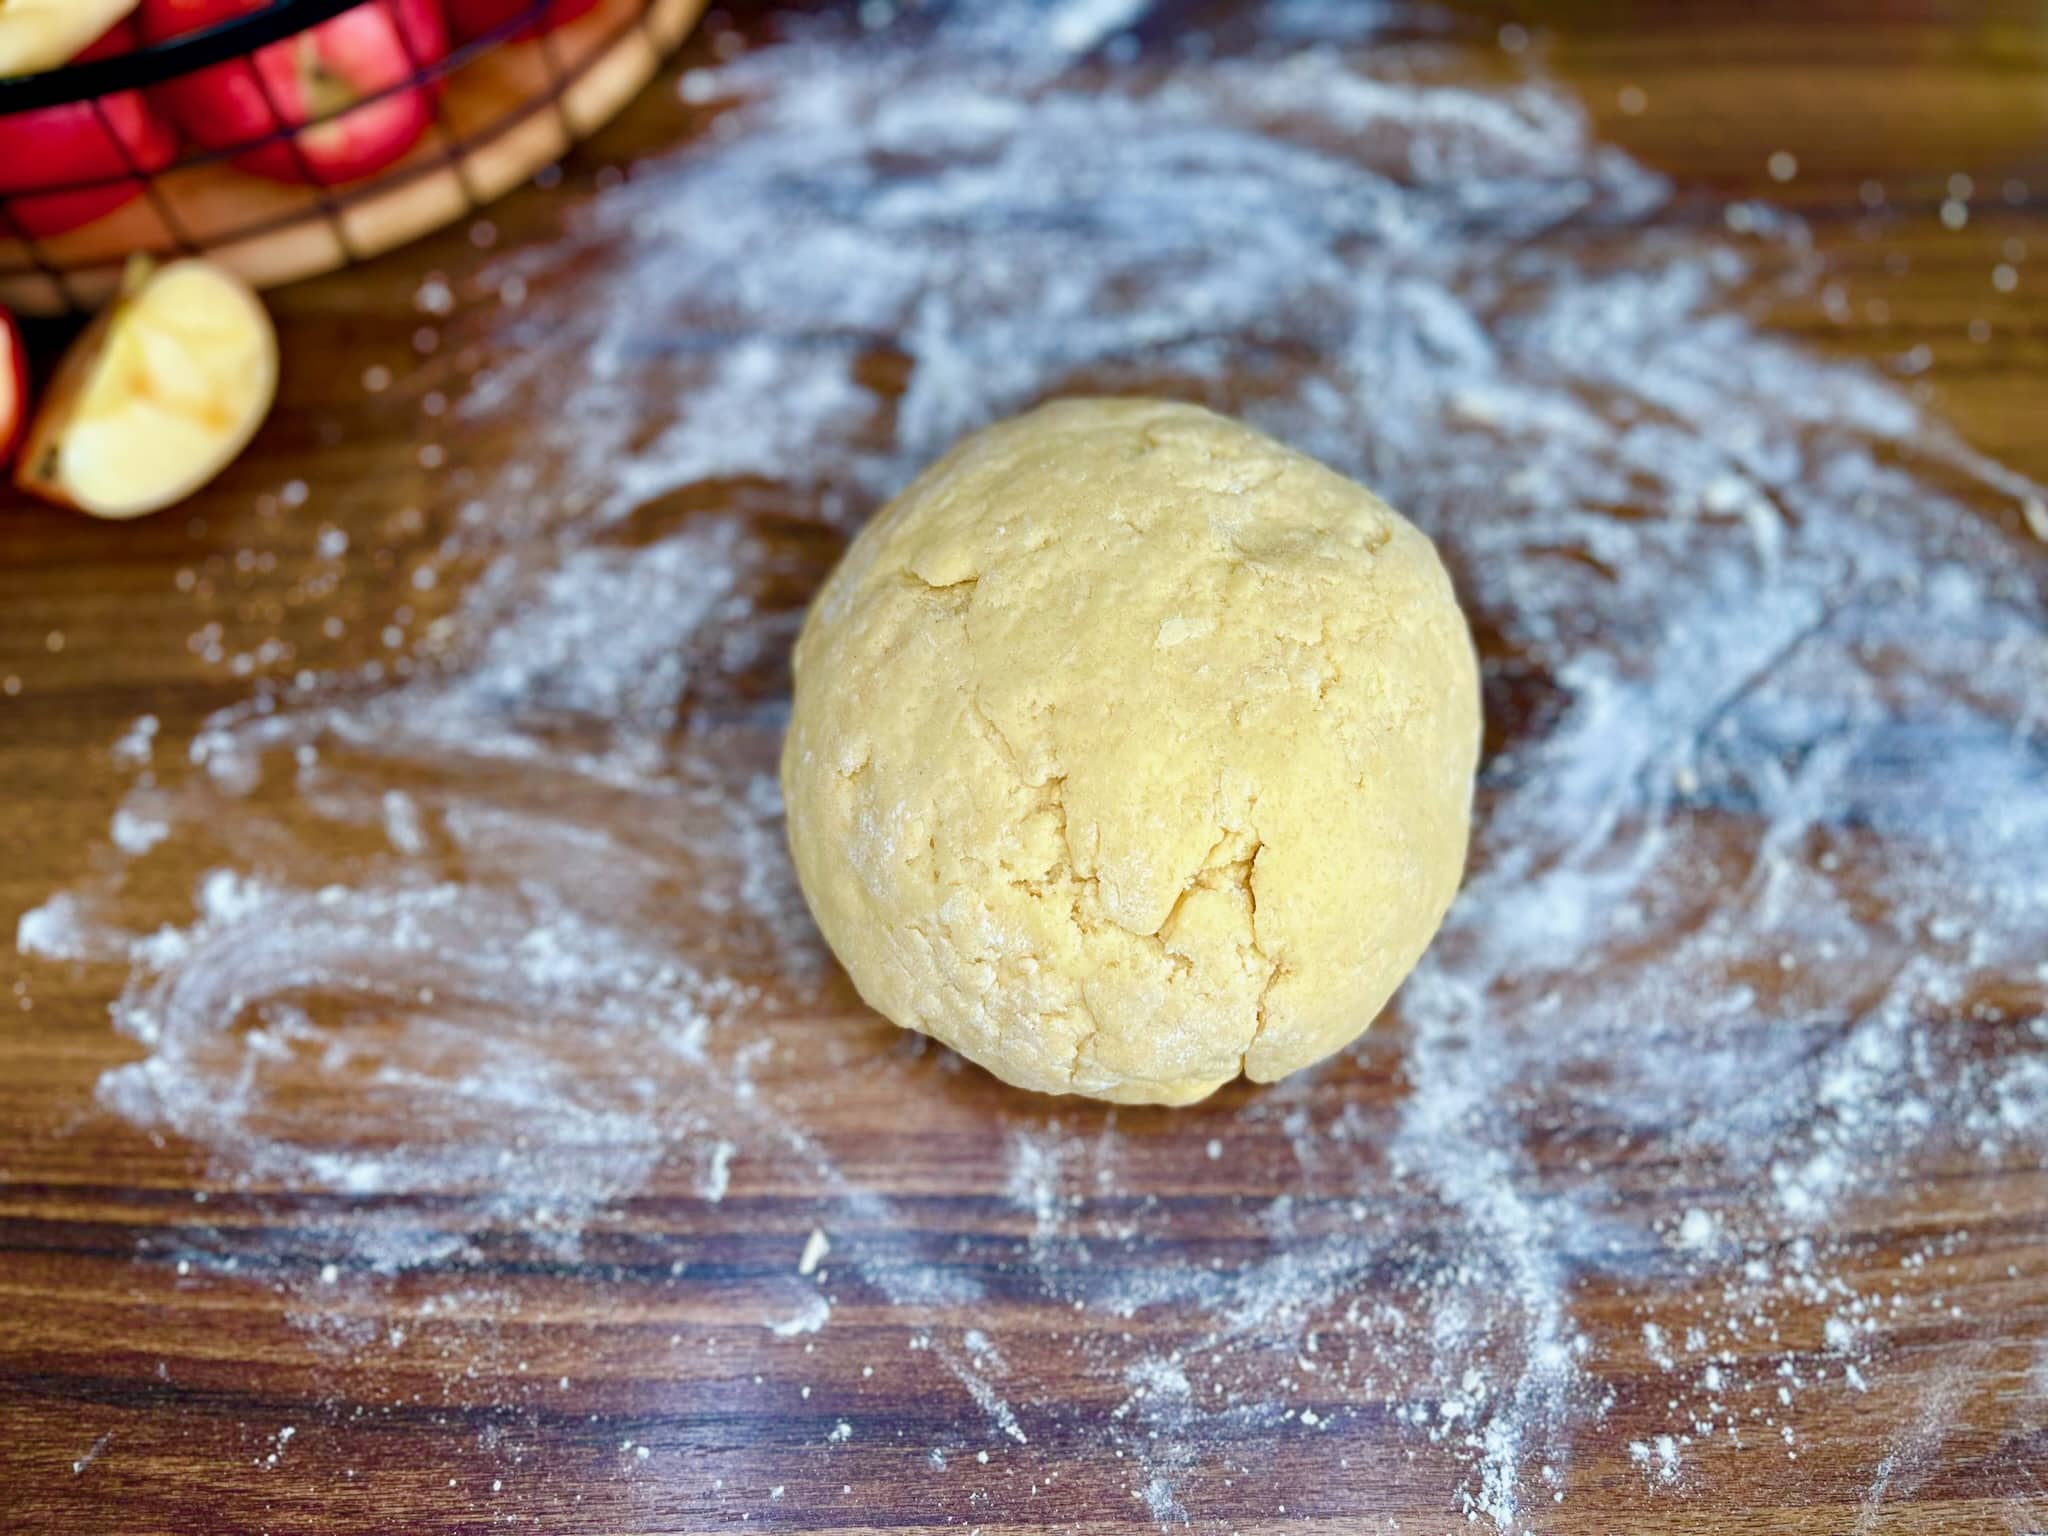 The dough ball is ready for resting